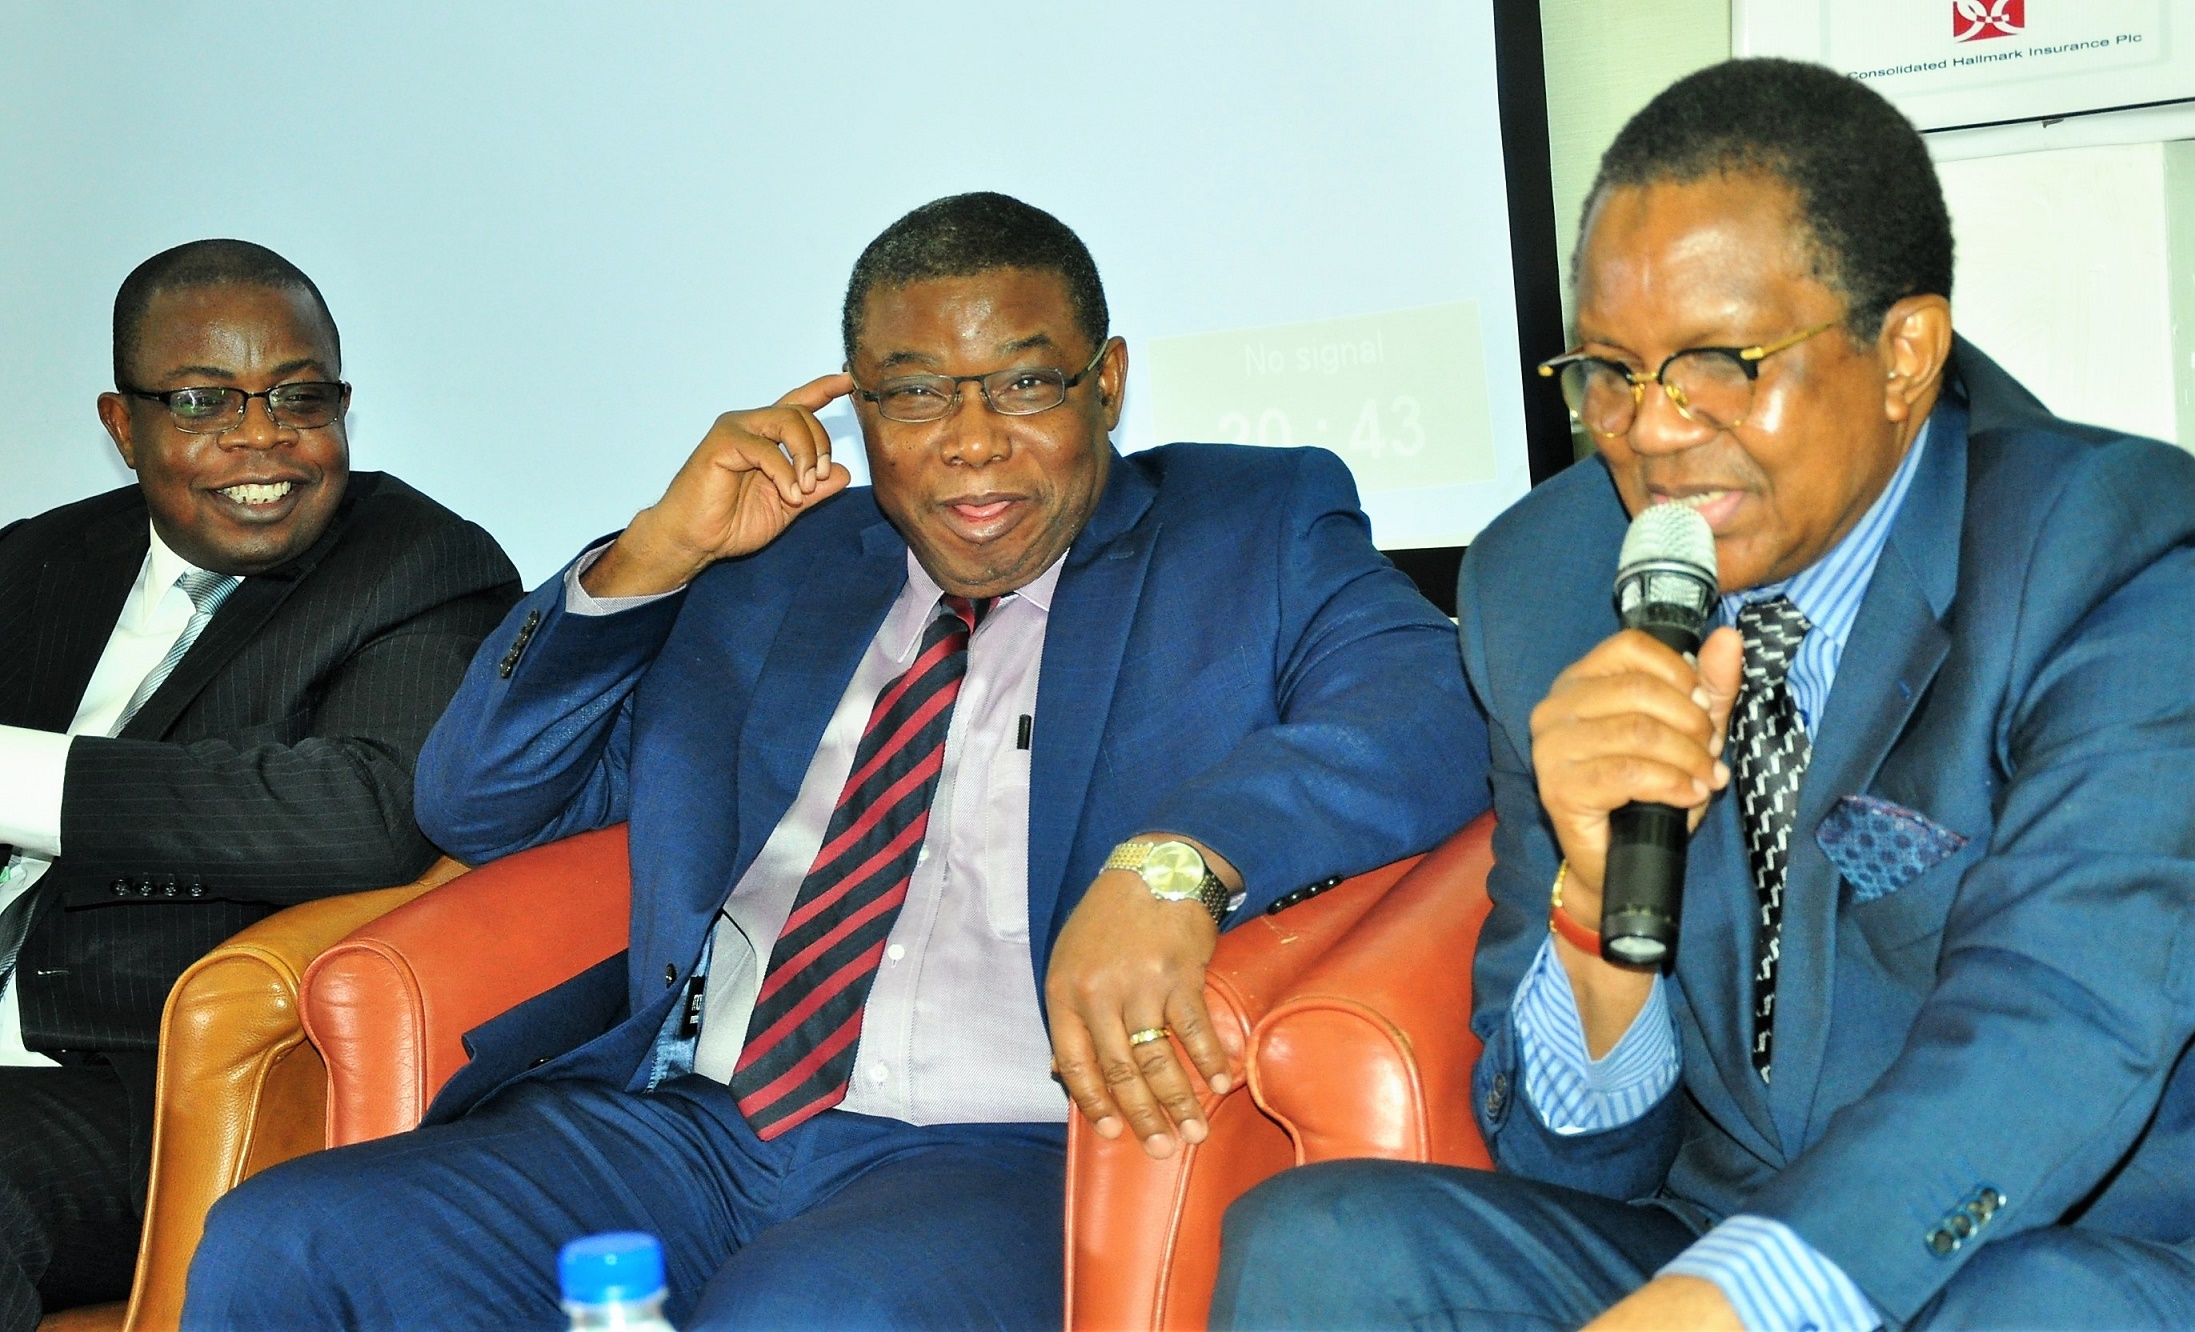 R-L:  Alhaji Bala Zakariya’u, past president, Chartered Insurance Institute of Nigeria and Chairman of occasion; Mr. George Onekhena, Deputy Commissioner, Finance and Administration, NAICOM, and Mr. Lana Loyinmi, Head Contribution & Bond Redemption, National Pension Commission, during the  3rd Annual National Conference of the National Association of Insurance and Pension Correspondents (NAIPCO) on The Role of Stakeholders in Developing Insurance and Pension Sectors held in Lagos on Thursday. August 09, 2018.